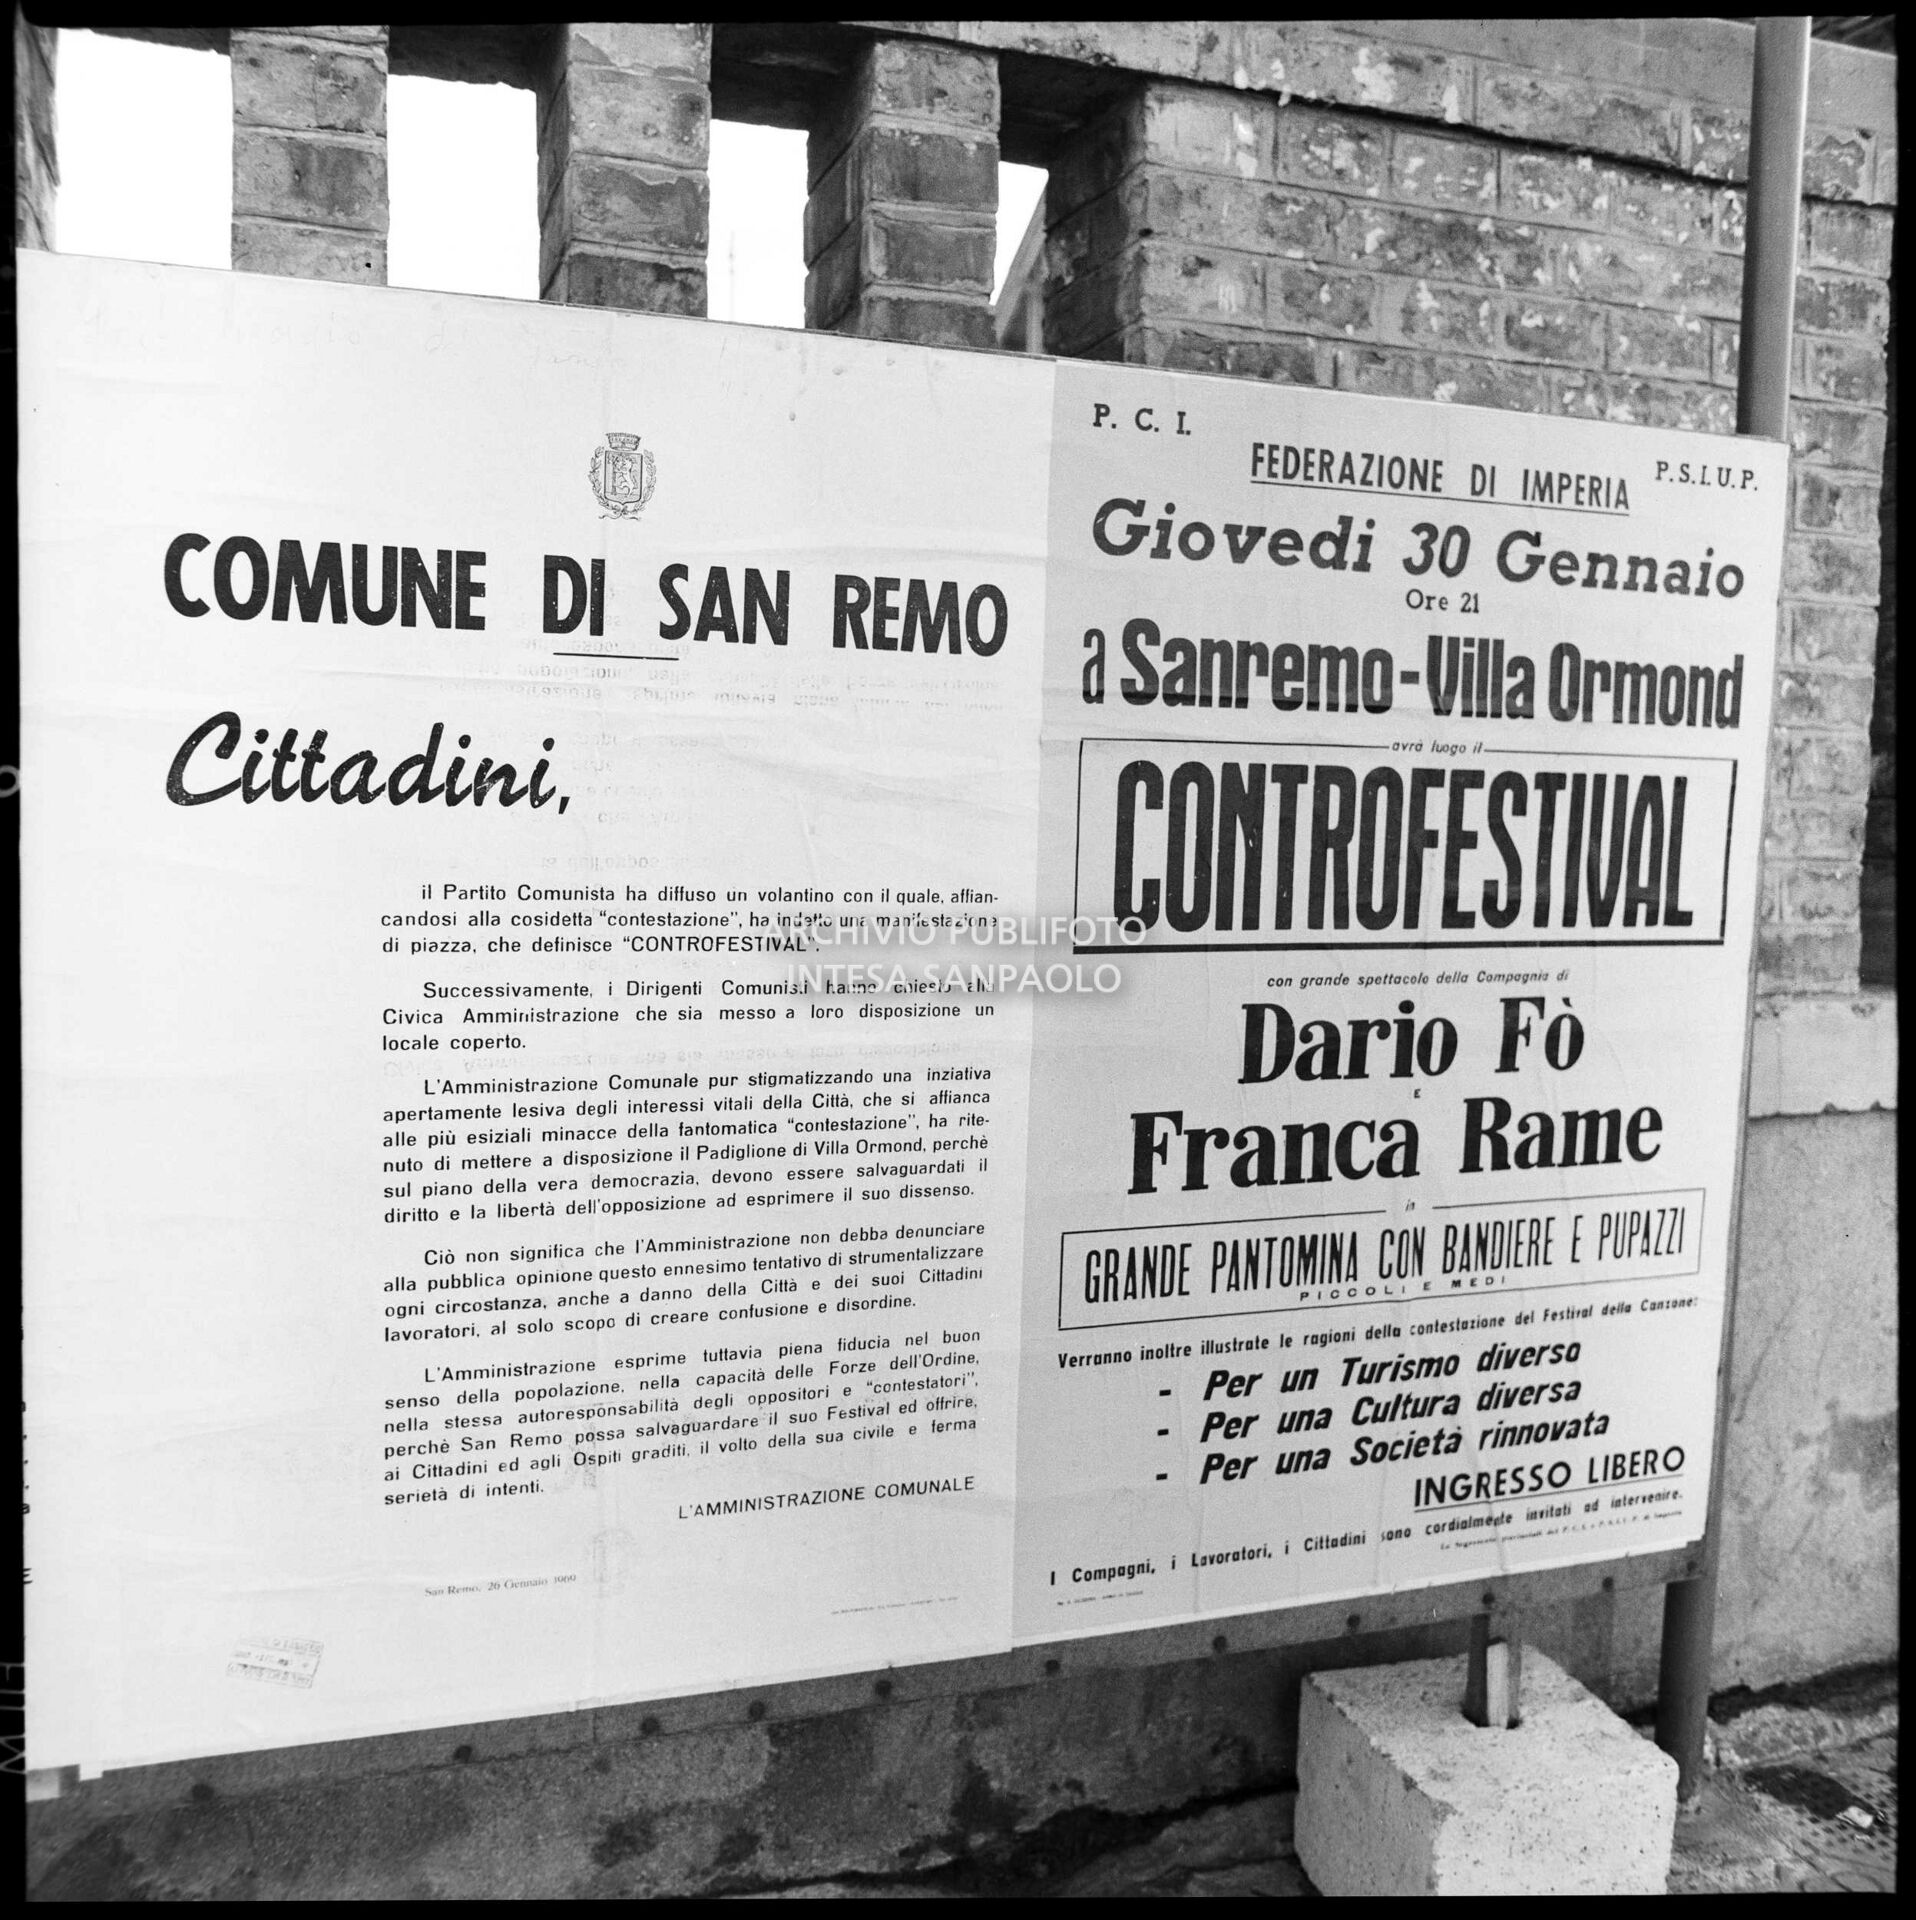 The poster of the Municipality of San Remo announcing that the Administration, while condemning the initiative, had granted a space to host Dario Fo and Franca Rame's "Controfestival" in conjunction with the 19th Sanremo Festival